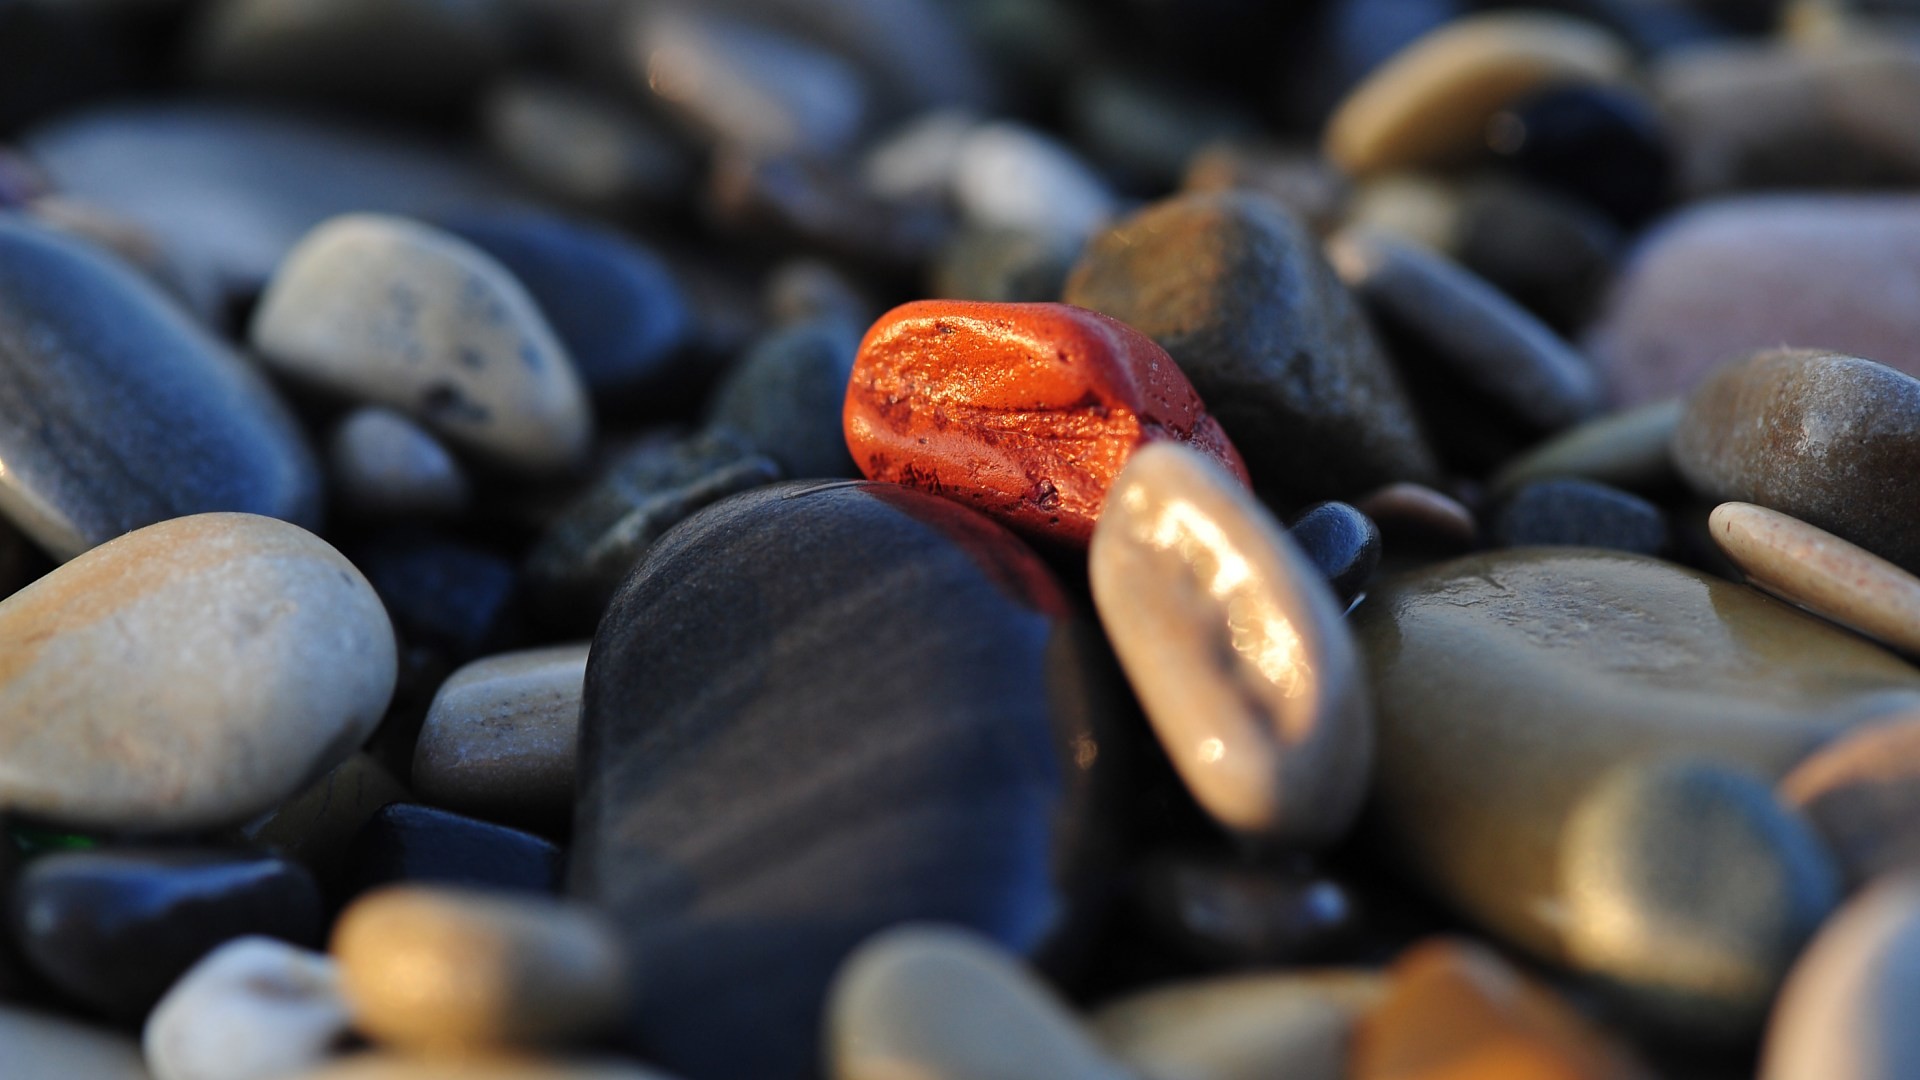 wallpaper hd for pc 1366x768,pebble,rock,close up,gravel,photography